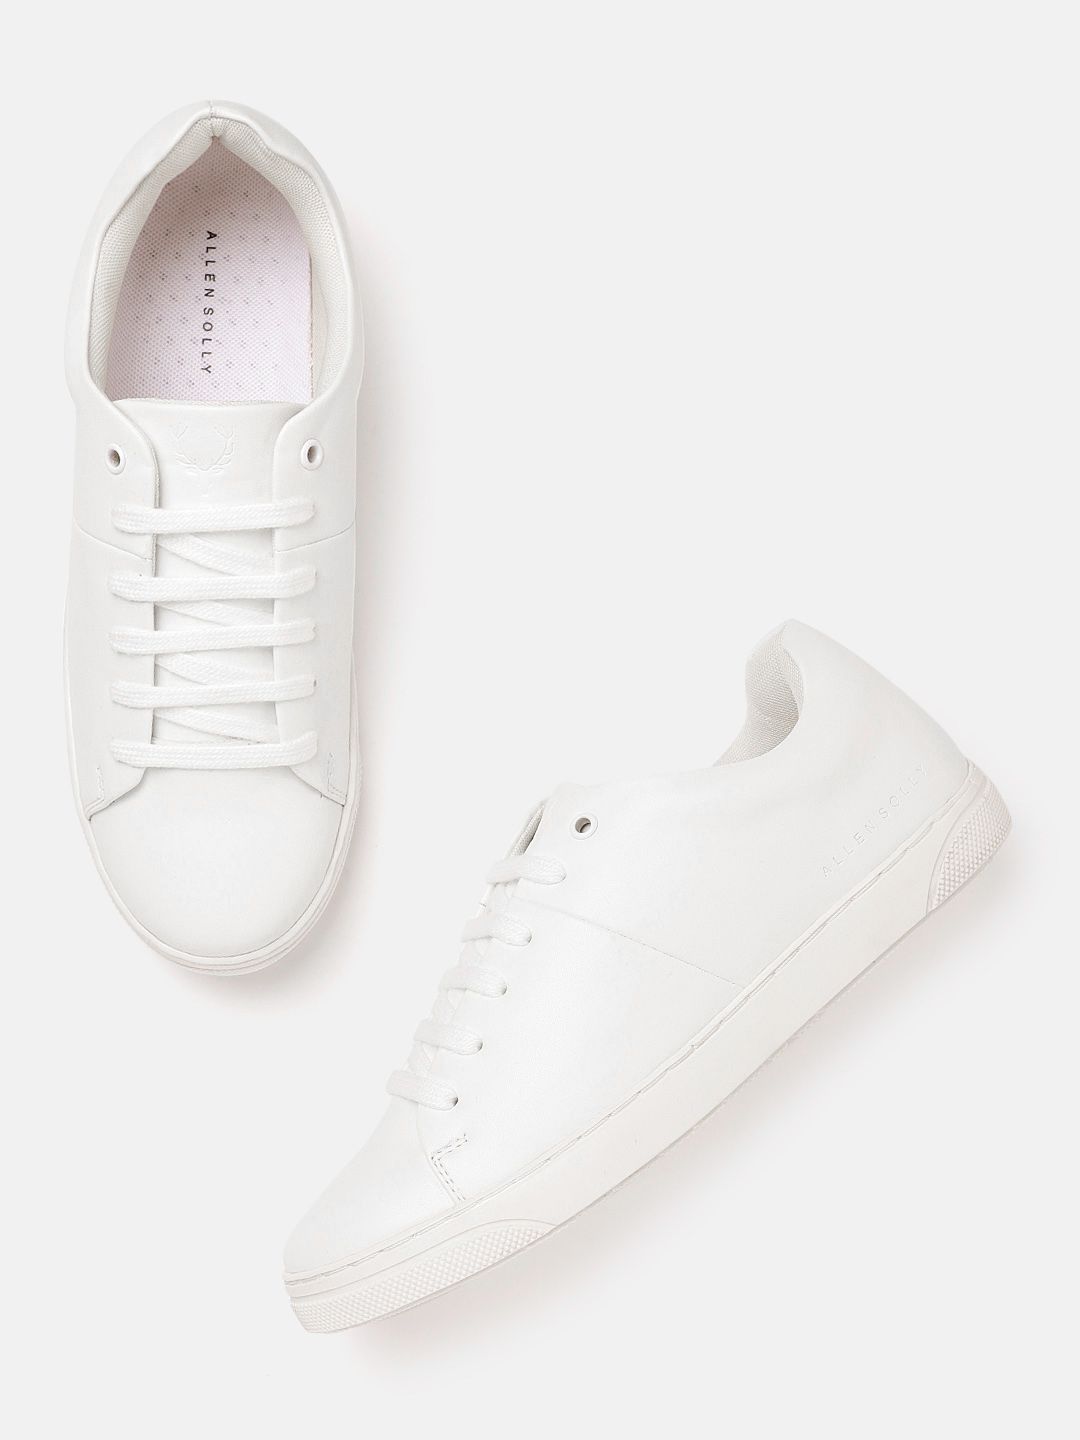 Allen Solly Women White Solid Sneakers Price in India